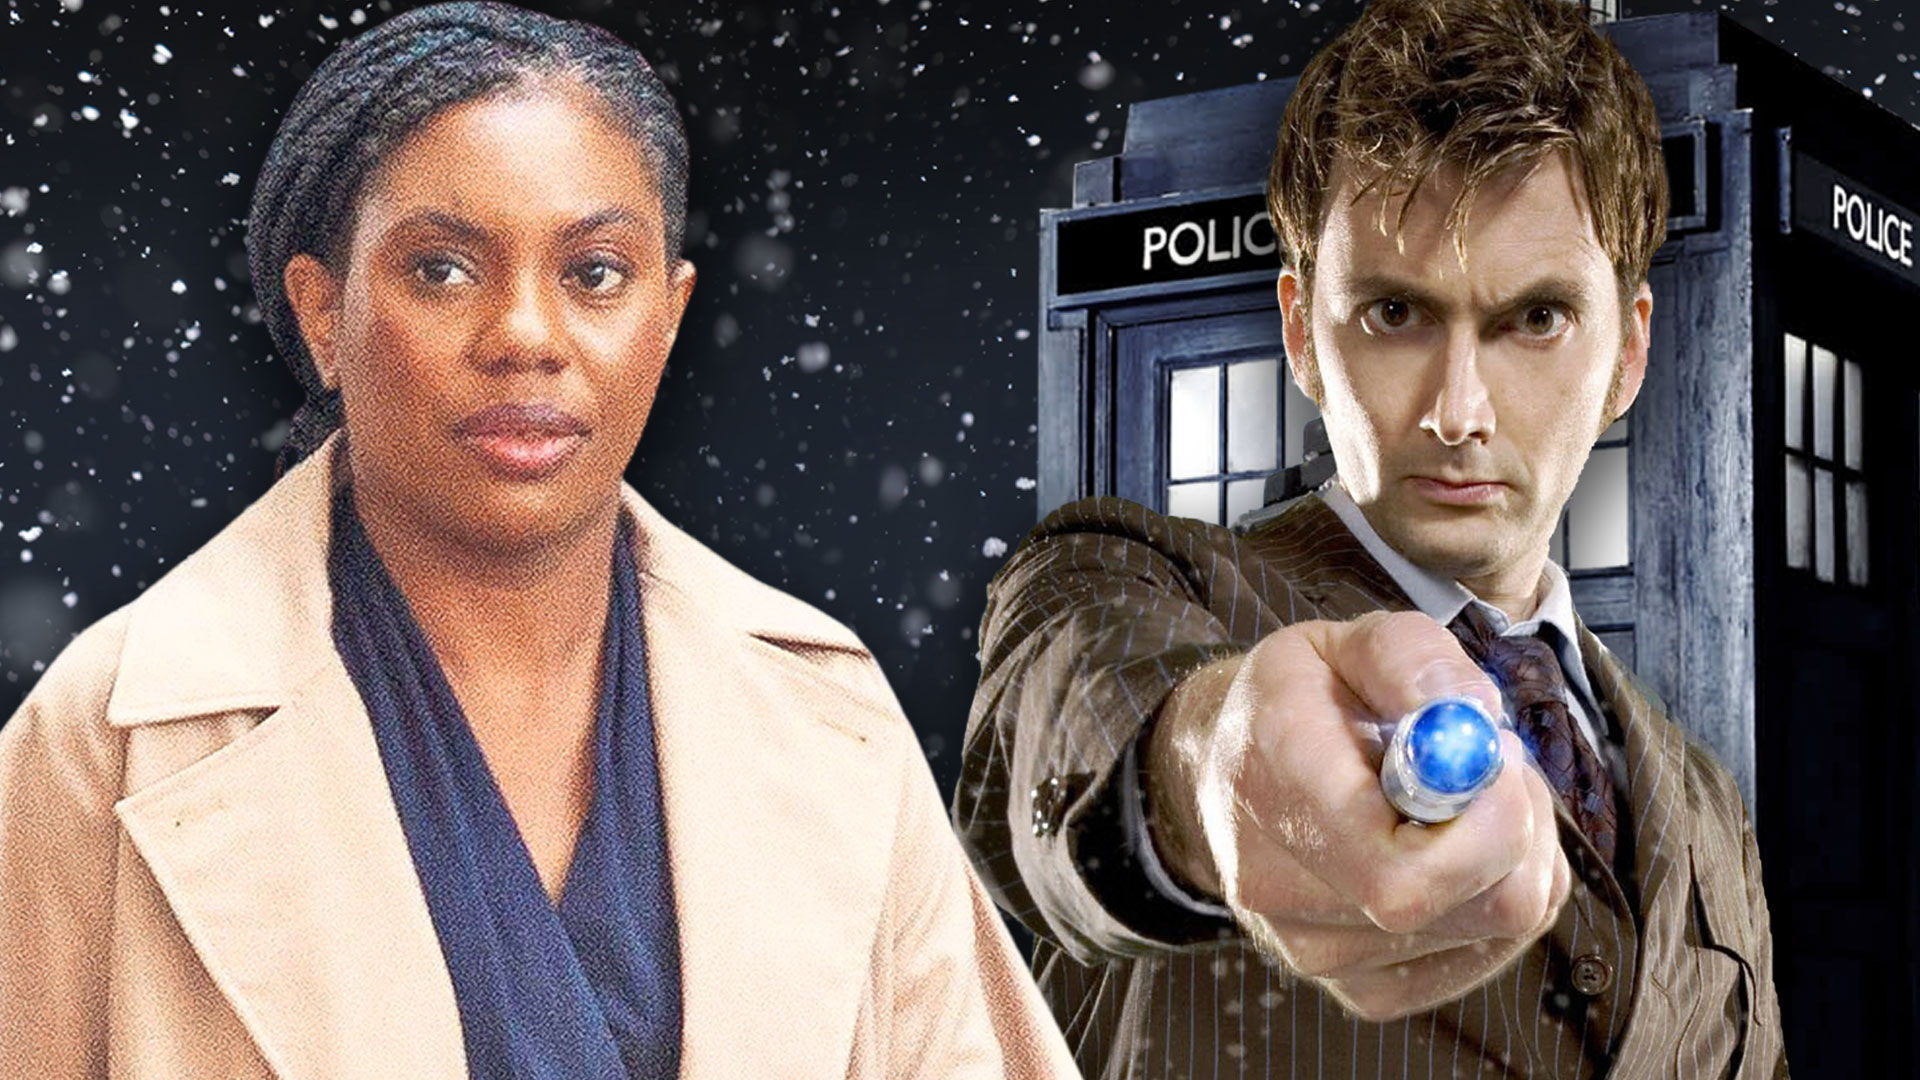 Kemi Badenoch blasts ‘rich, lefty’ Doctor Who star David Tennant after his sick attack on her over trans rights views [Video]